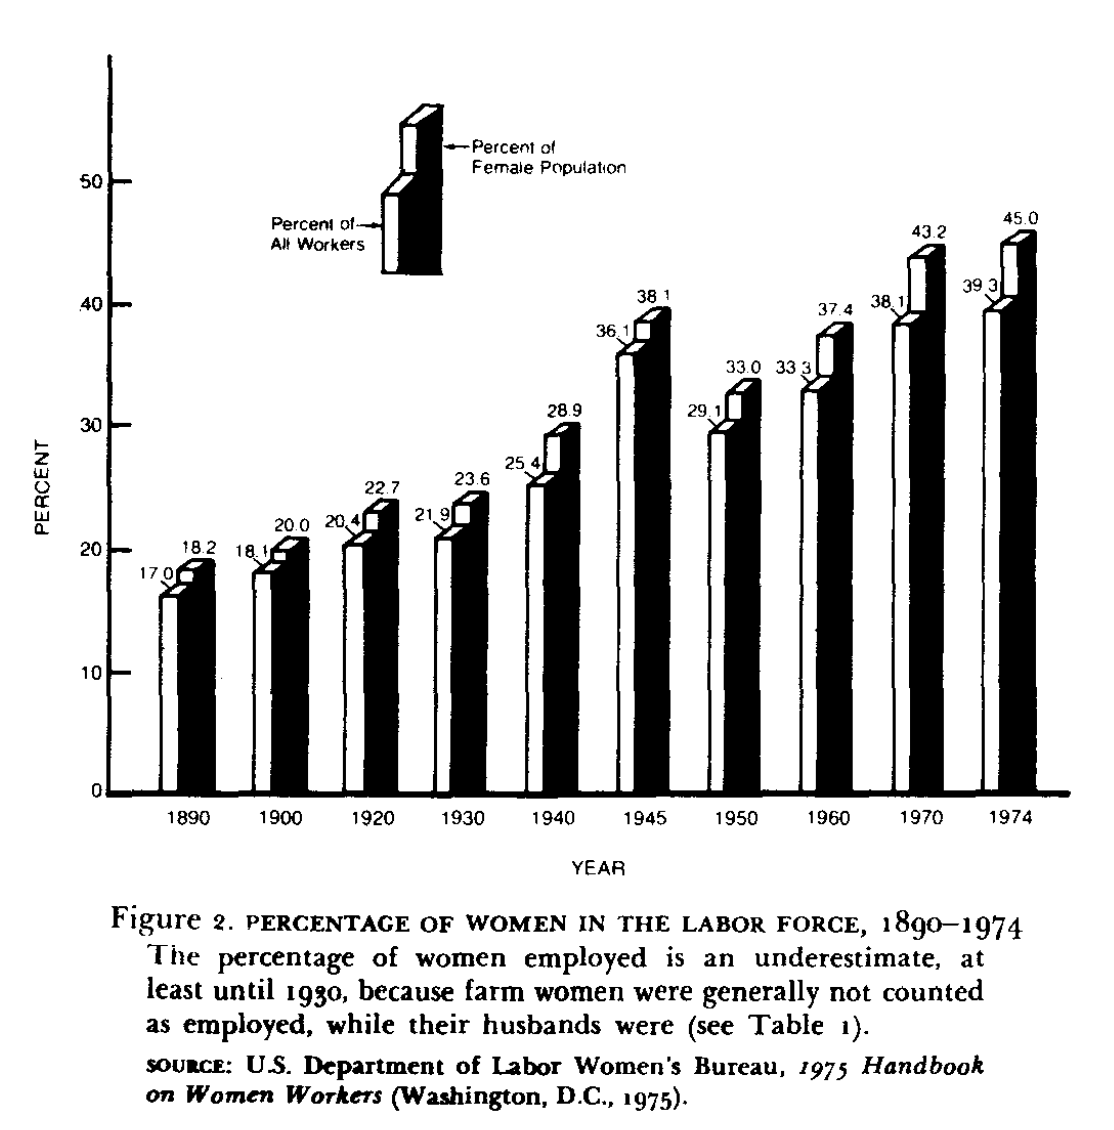 Figure 2. PERCENTAGE OF WOMEN IN THE LABOR FORCE, 1890-1974. The percentage of women employed is an underestimate, at least until 1930, because farm women were generally not counted as employed, while their husbands were (see Table 1). Source: U.S. Department of Labor Women's Bureau, 1975 Handbook on Women Workers (Washington, D.C., 1975). Bar graph showing the increasing percent of women in the workforce from 1890 to 1974, by percent of all workers and percent of female population. 